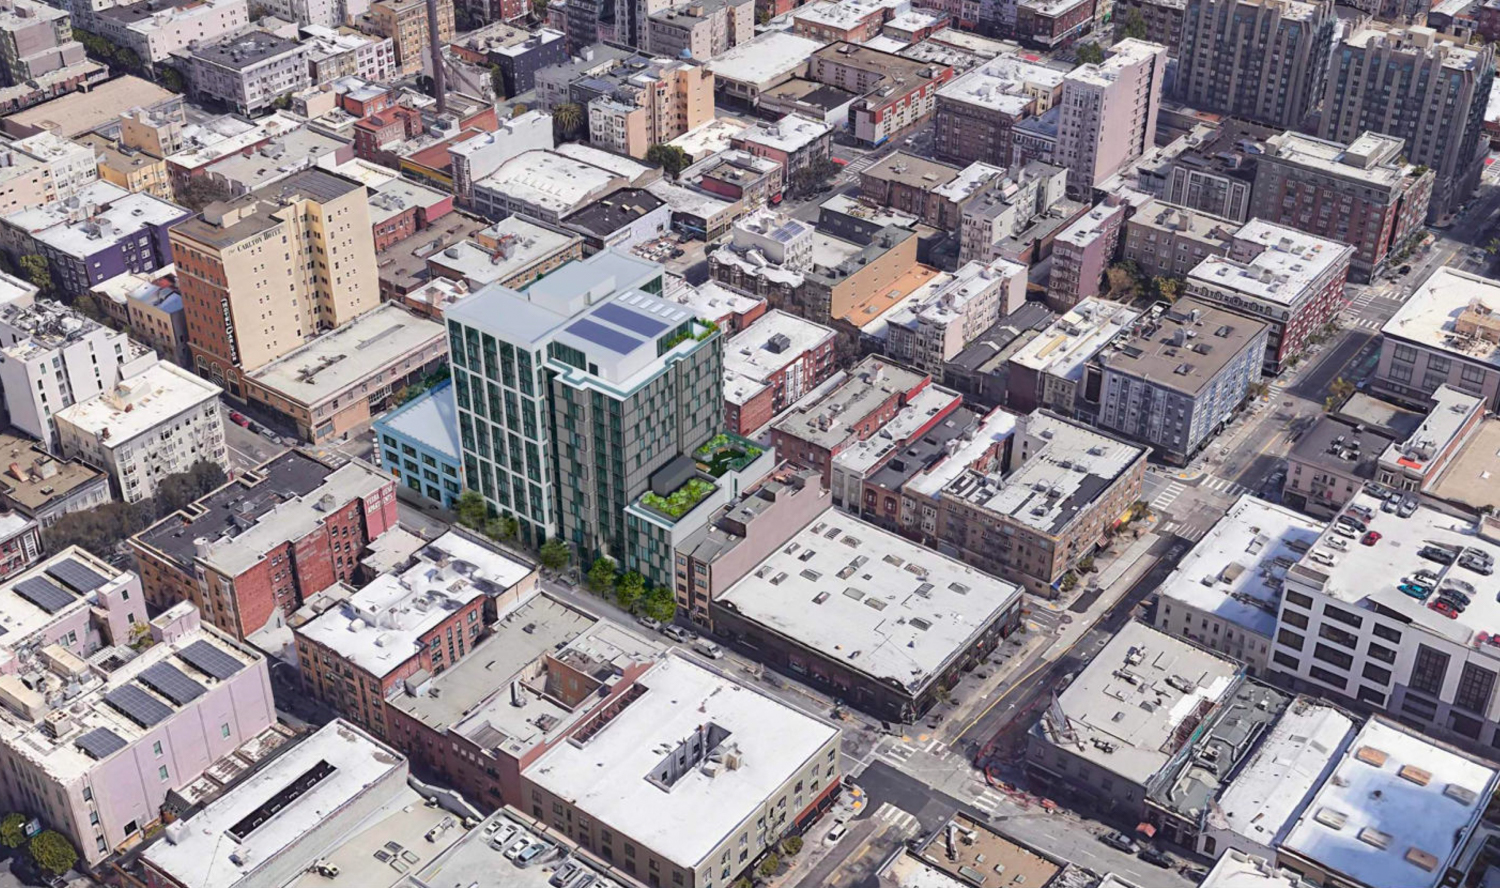 1101-1123 Sutter Street aerial perspective, rendering by David Baker Architects